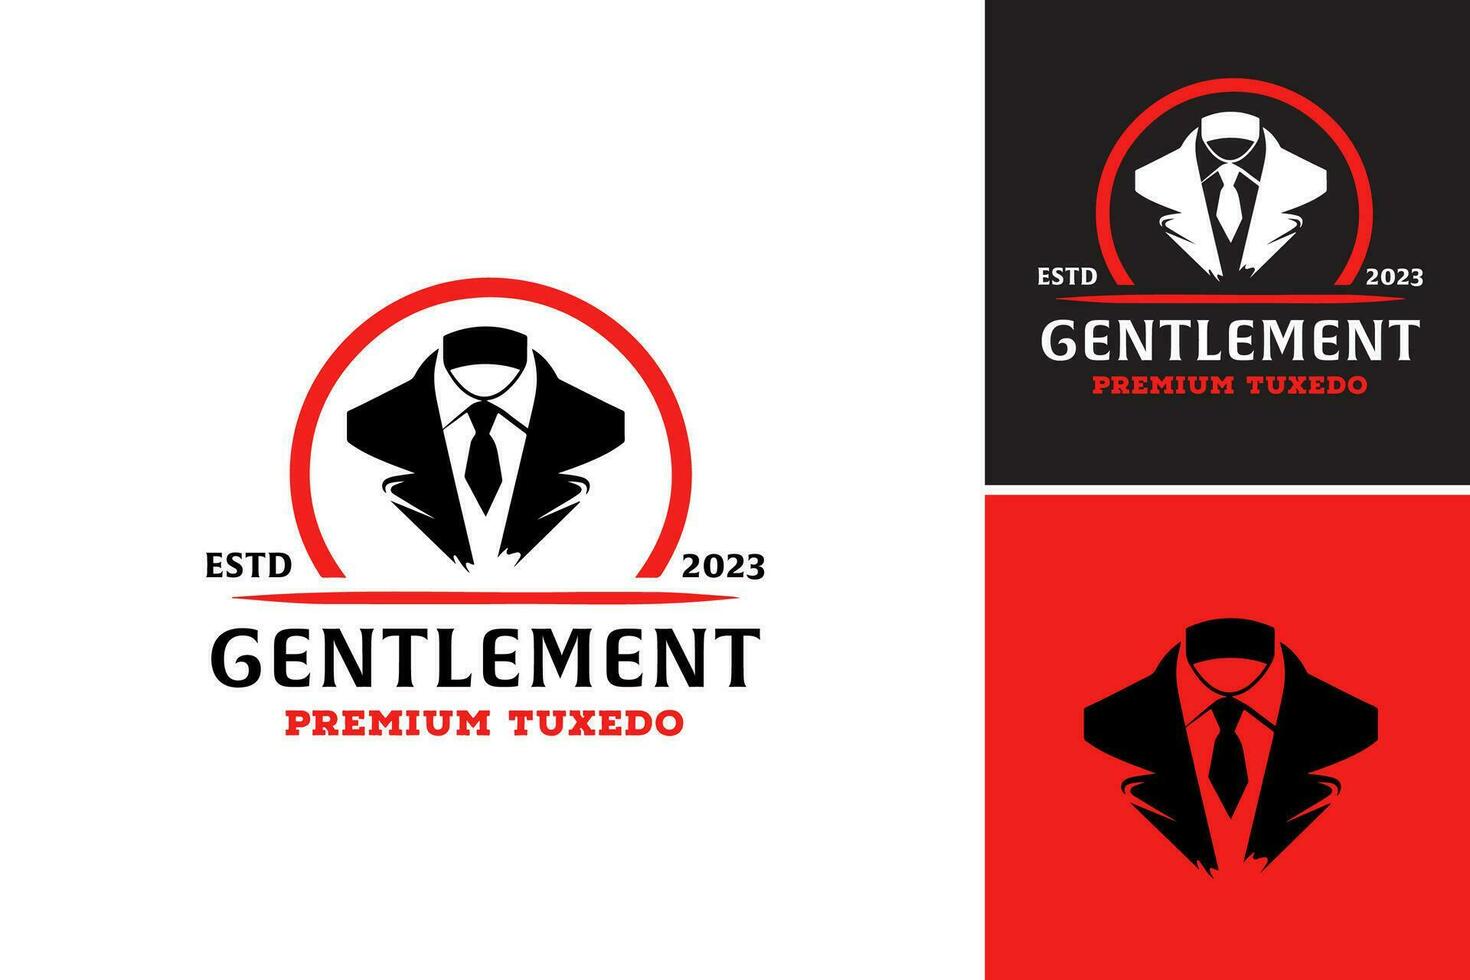 Gentleman's Premium Tuxedo Logo This asset is a high-quality logo design featuring a stylish tuxedo, perfect for businesses or brands related to menswear, formal events, or luxury fashion. vector